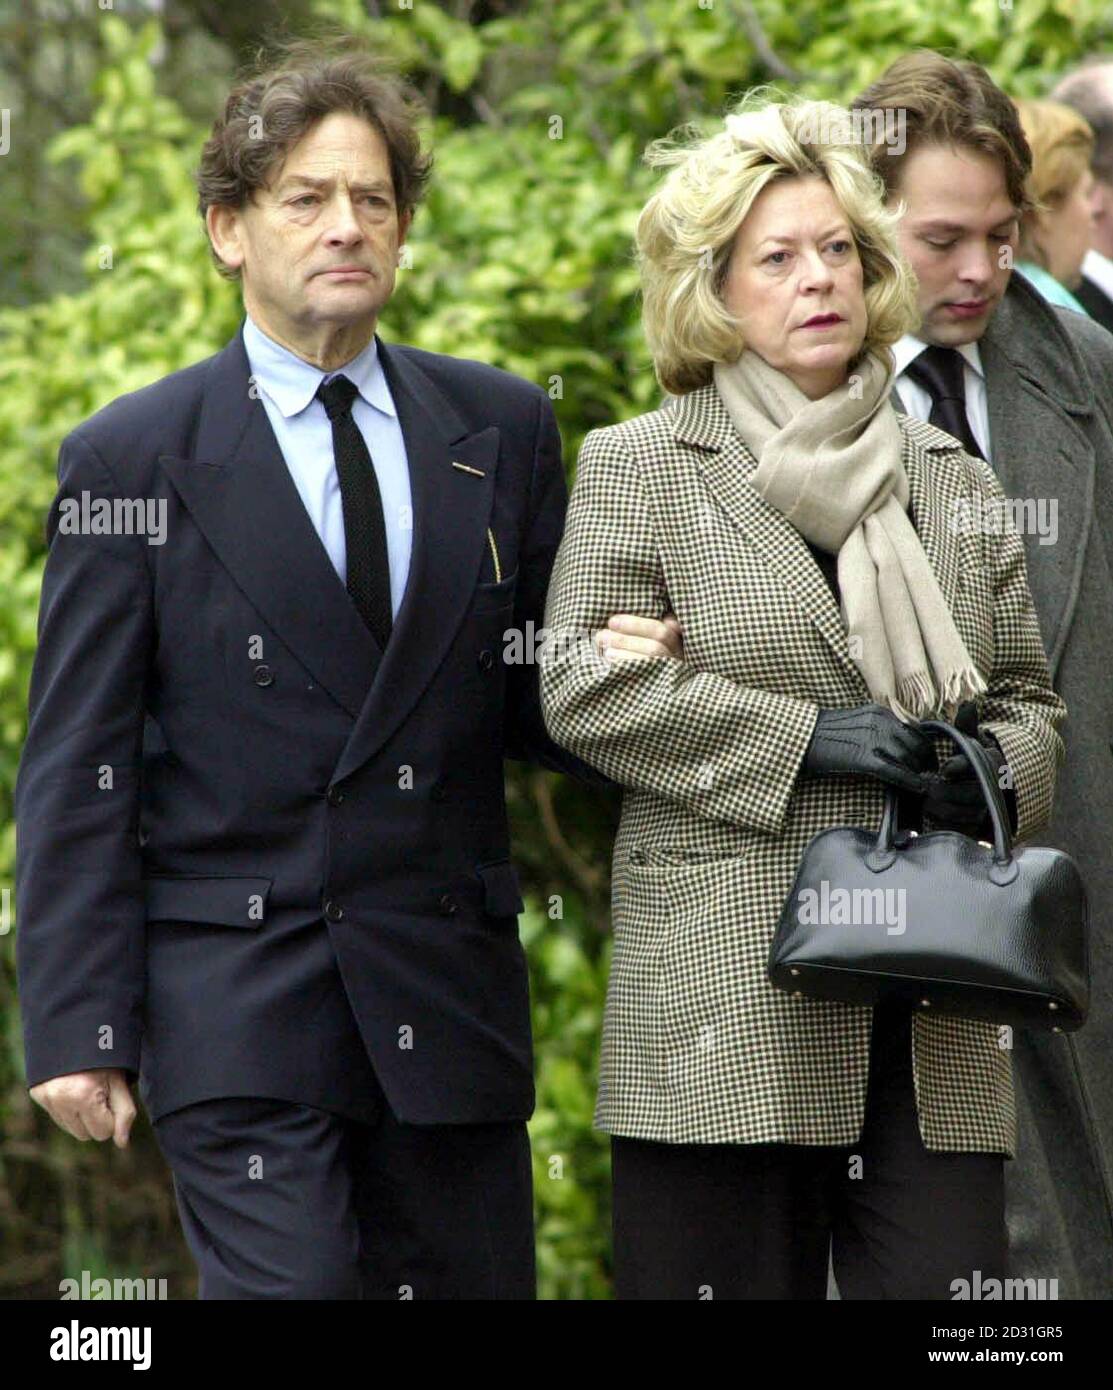 Former British Chancellor Nigel Lawson and his wife Therese arrive at  West London Crematorium for the funeral of John Diamond - the late husband of their daughter, food writer Nigella Lawson. Diamond died on 02/03/01 from cancer. Stock Photo